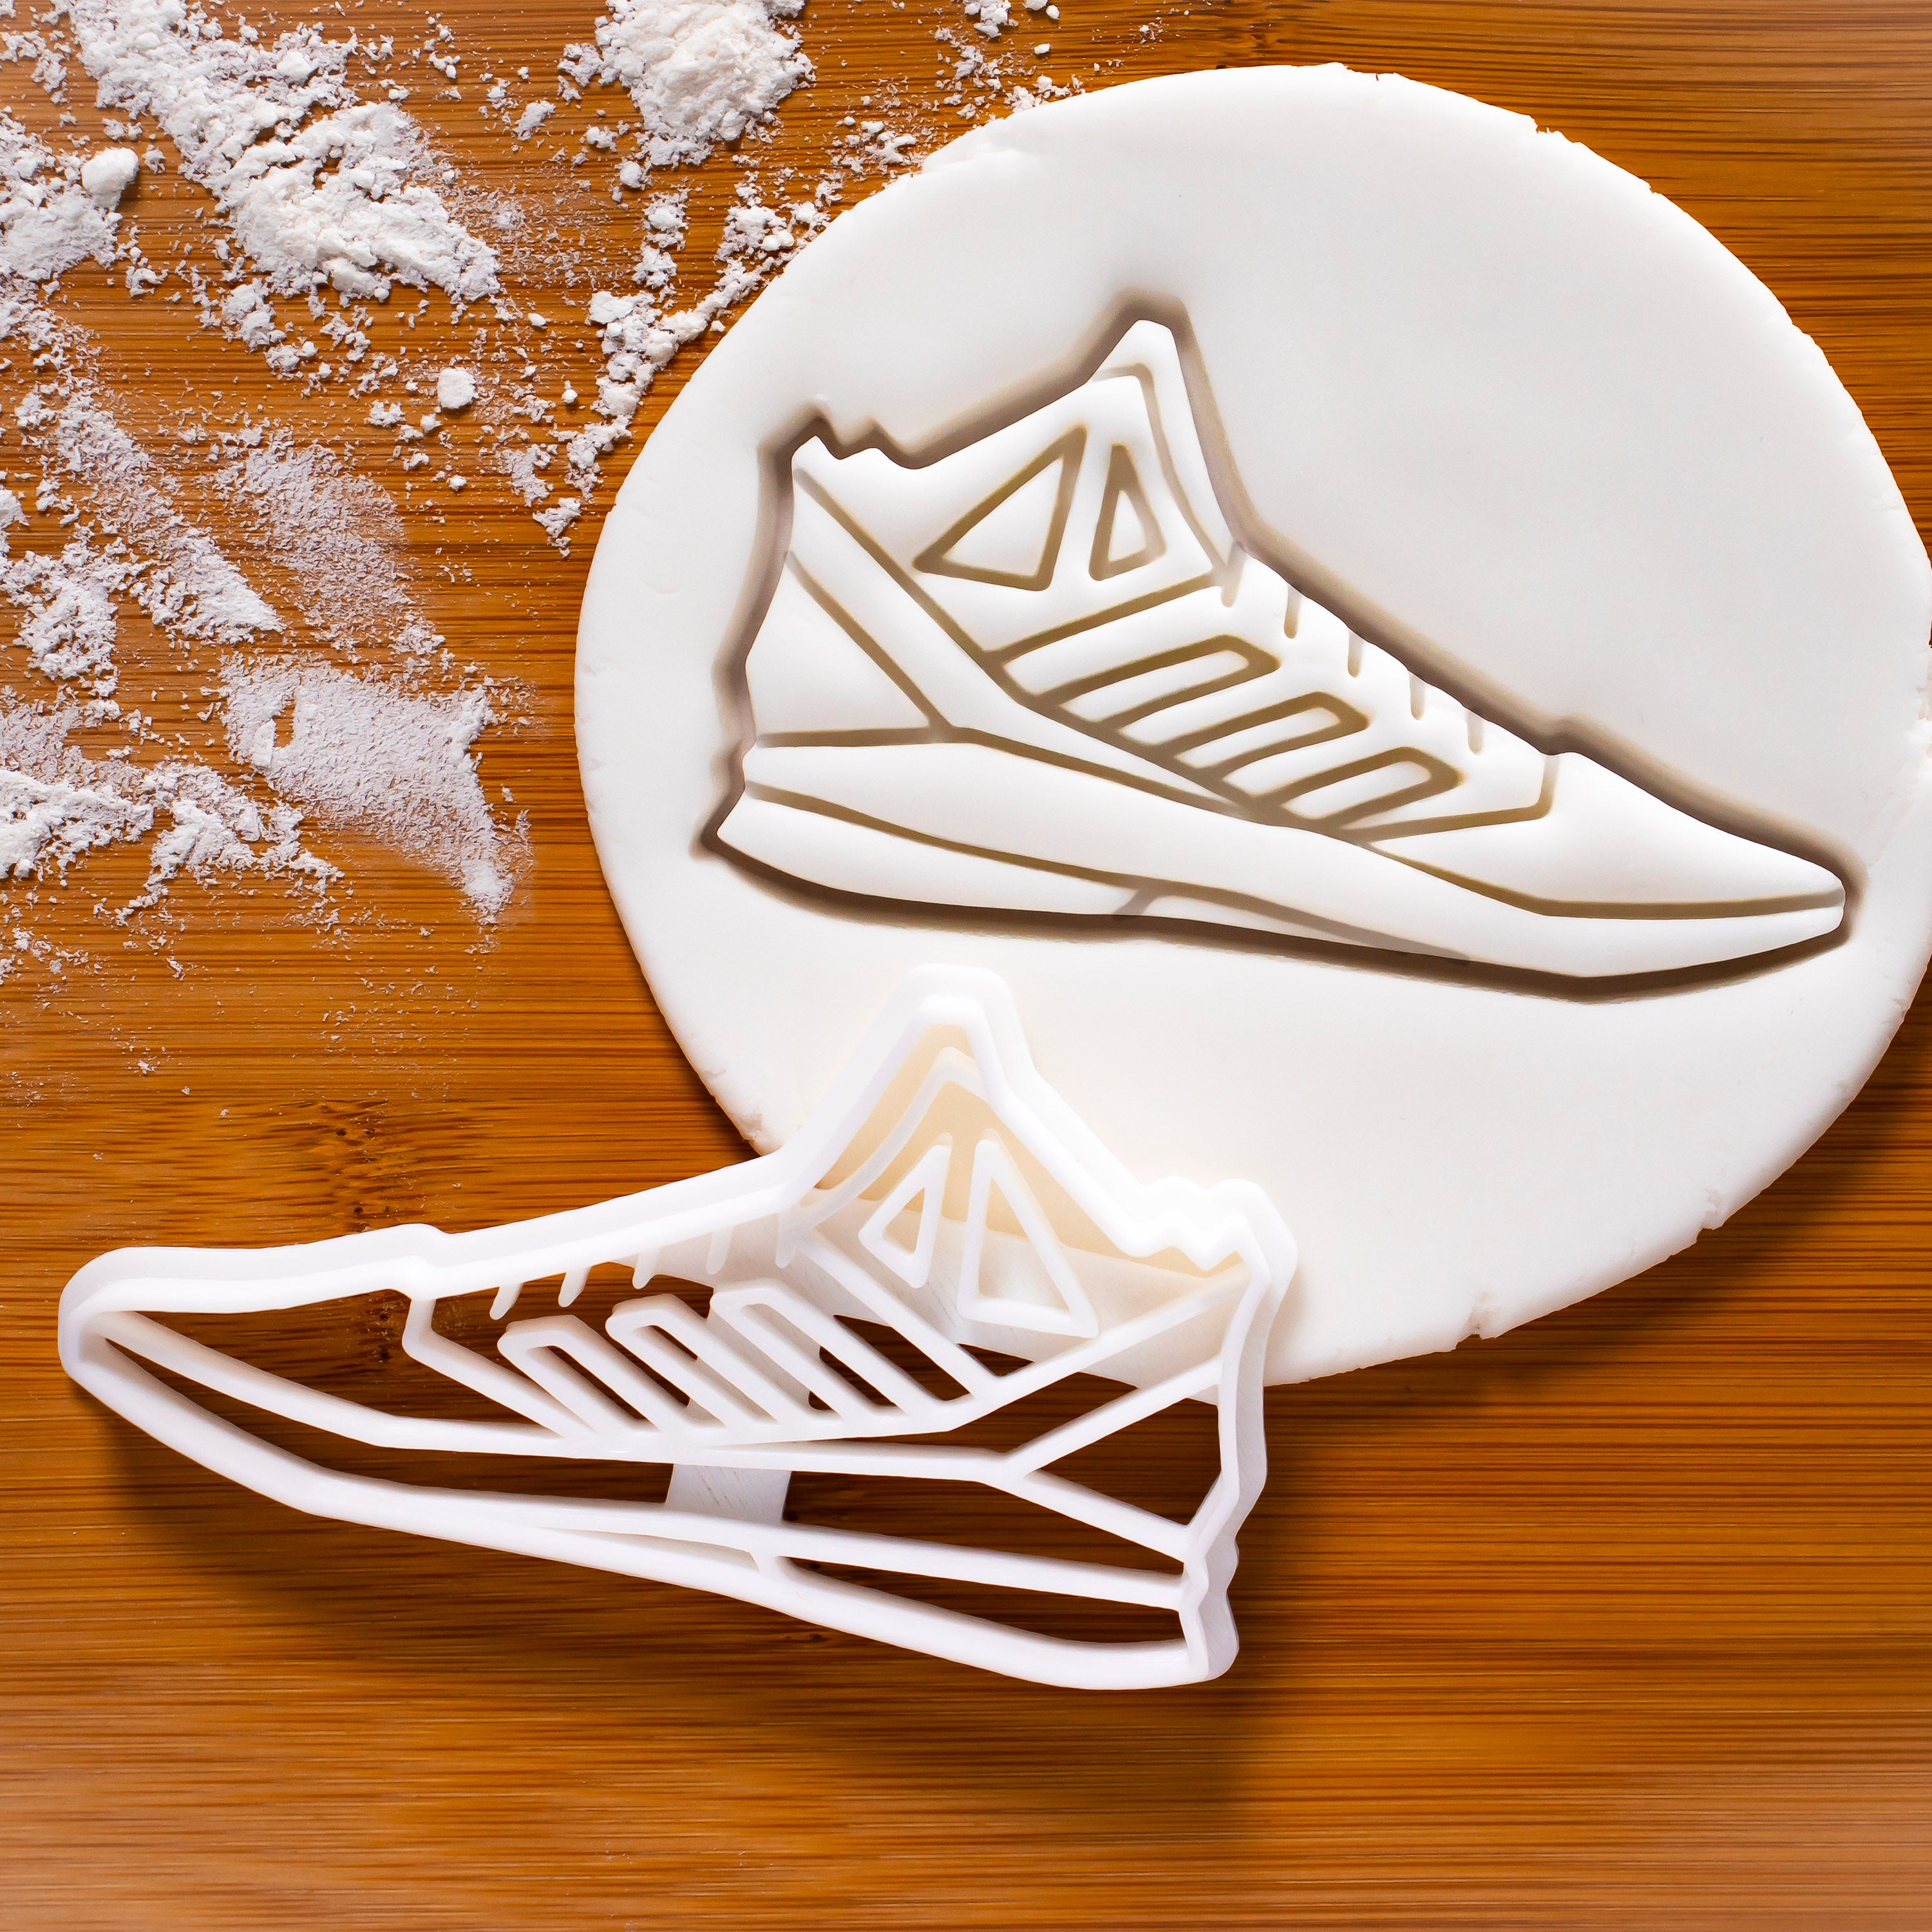 Sneaker Cookie Cutter by MinnieCakes - Sweetleigh